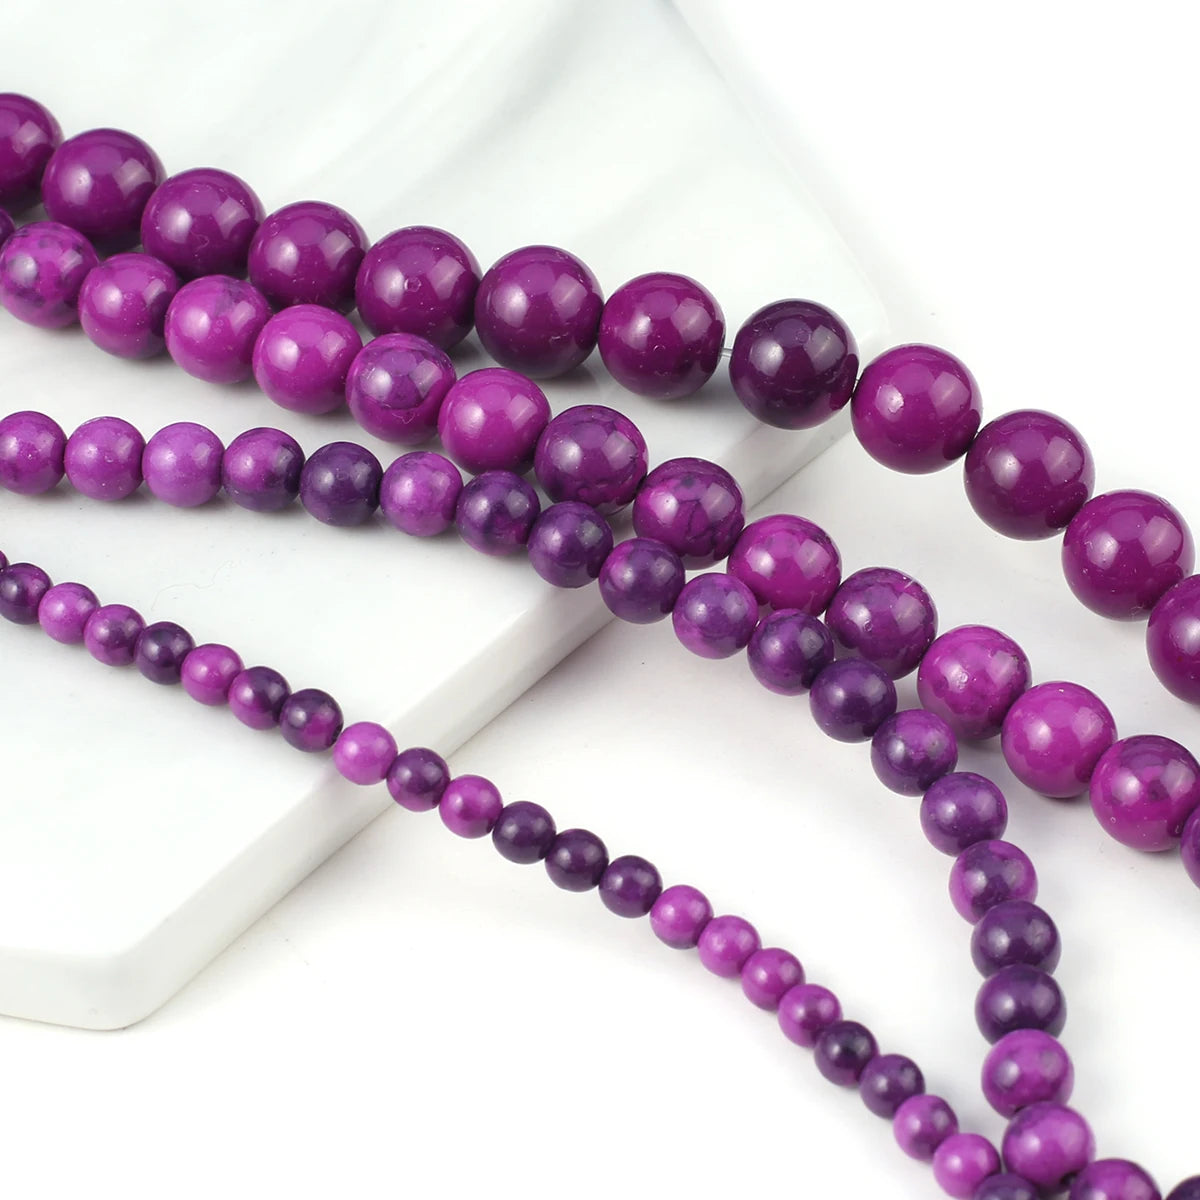 Natural Purple Phoenix Stone 4/6/8/10/12mm Beads Spacer Beads for Jewelery Making Supplies DIY Women Necklace Bracelet Accessory